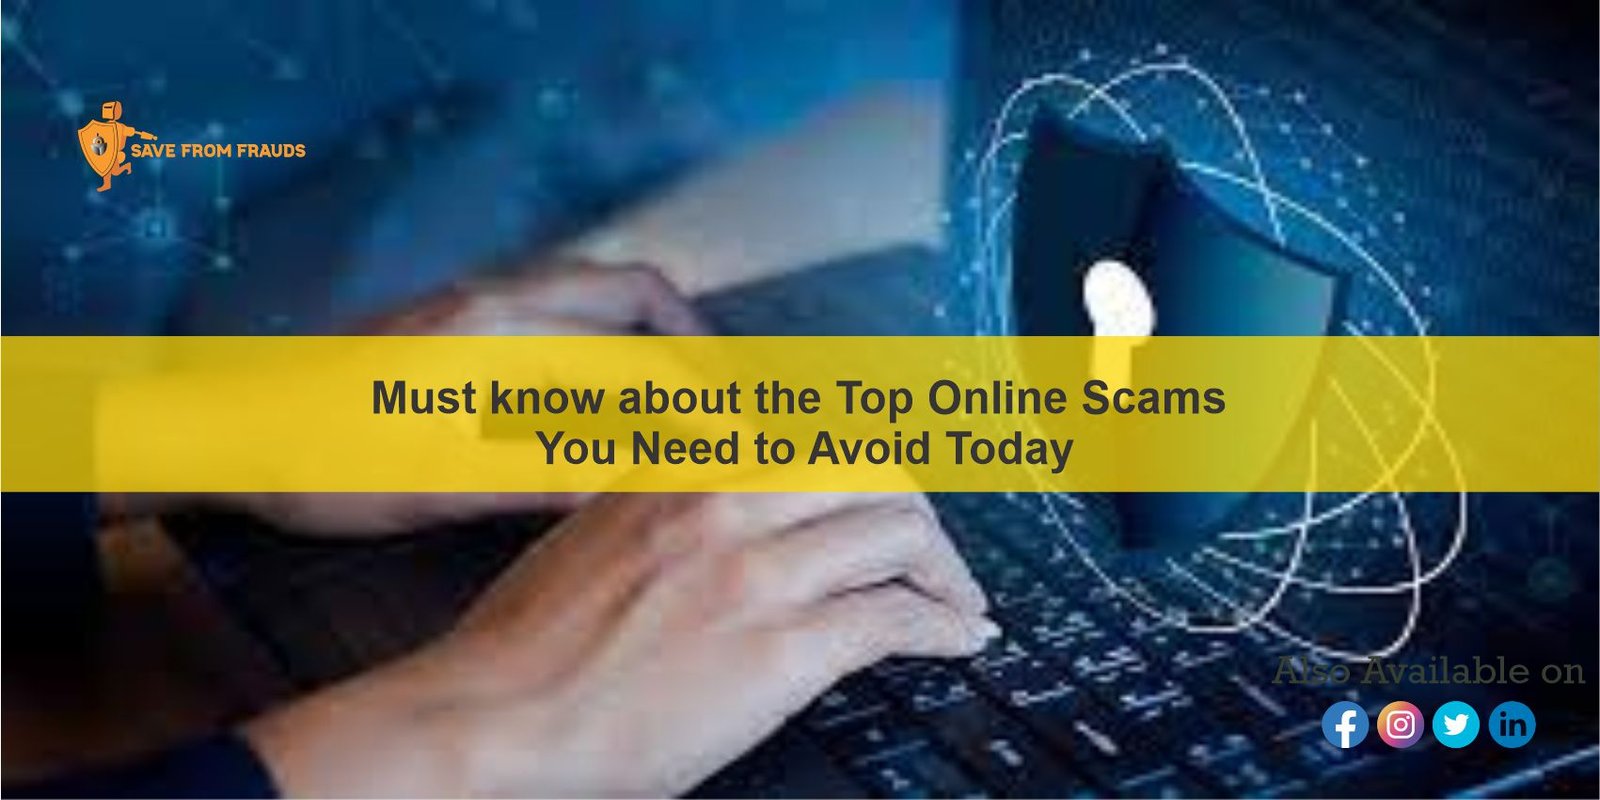 Top Online Scams You Need to Avoid Today